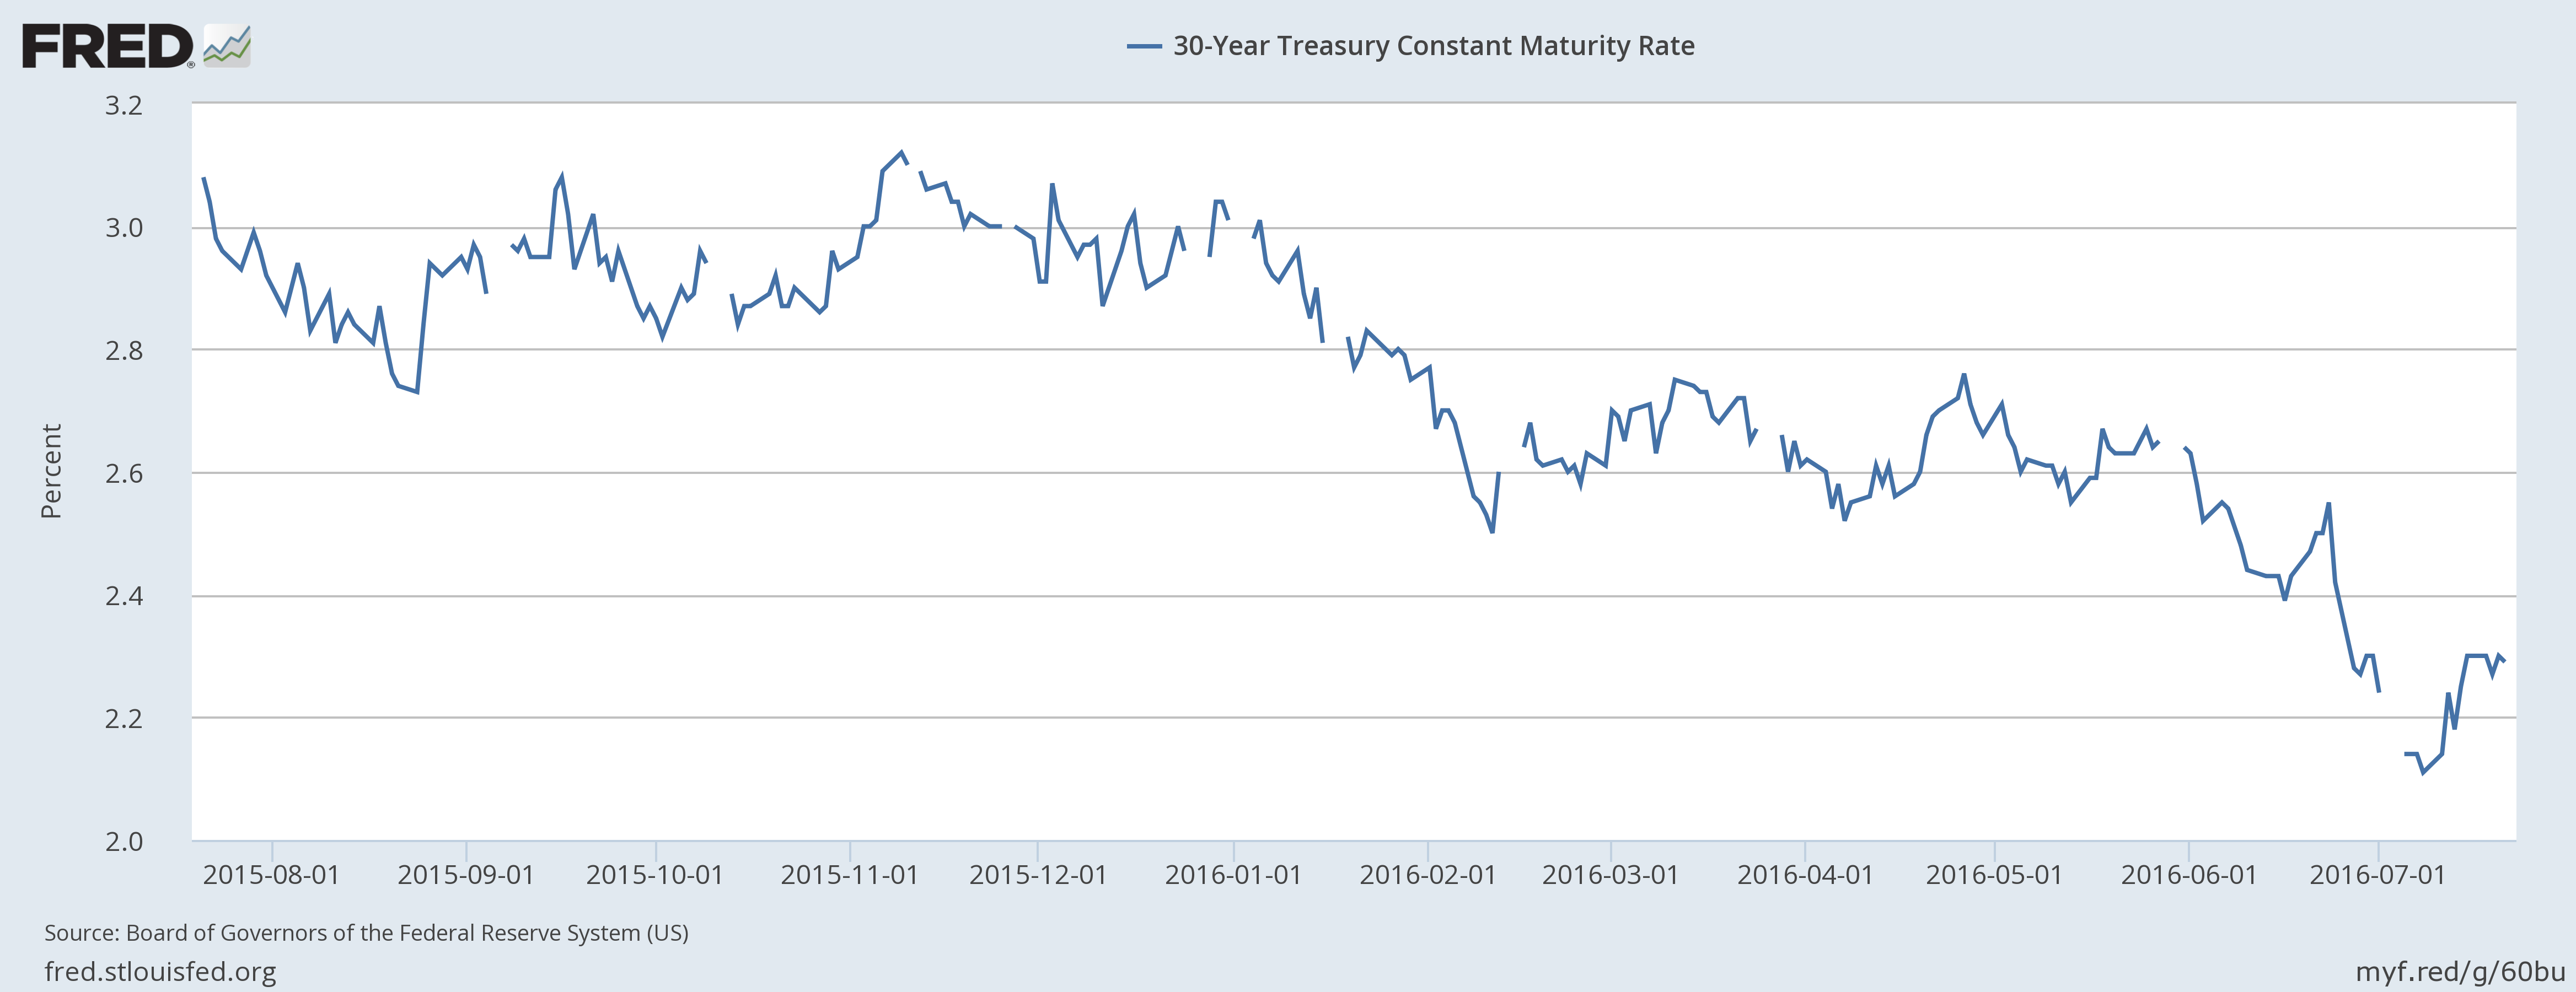 30-Year Treasury Constant Maturity Rate 2015-2016